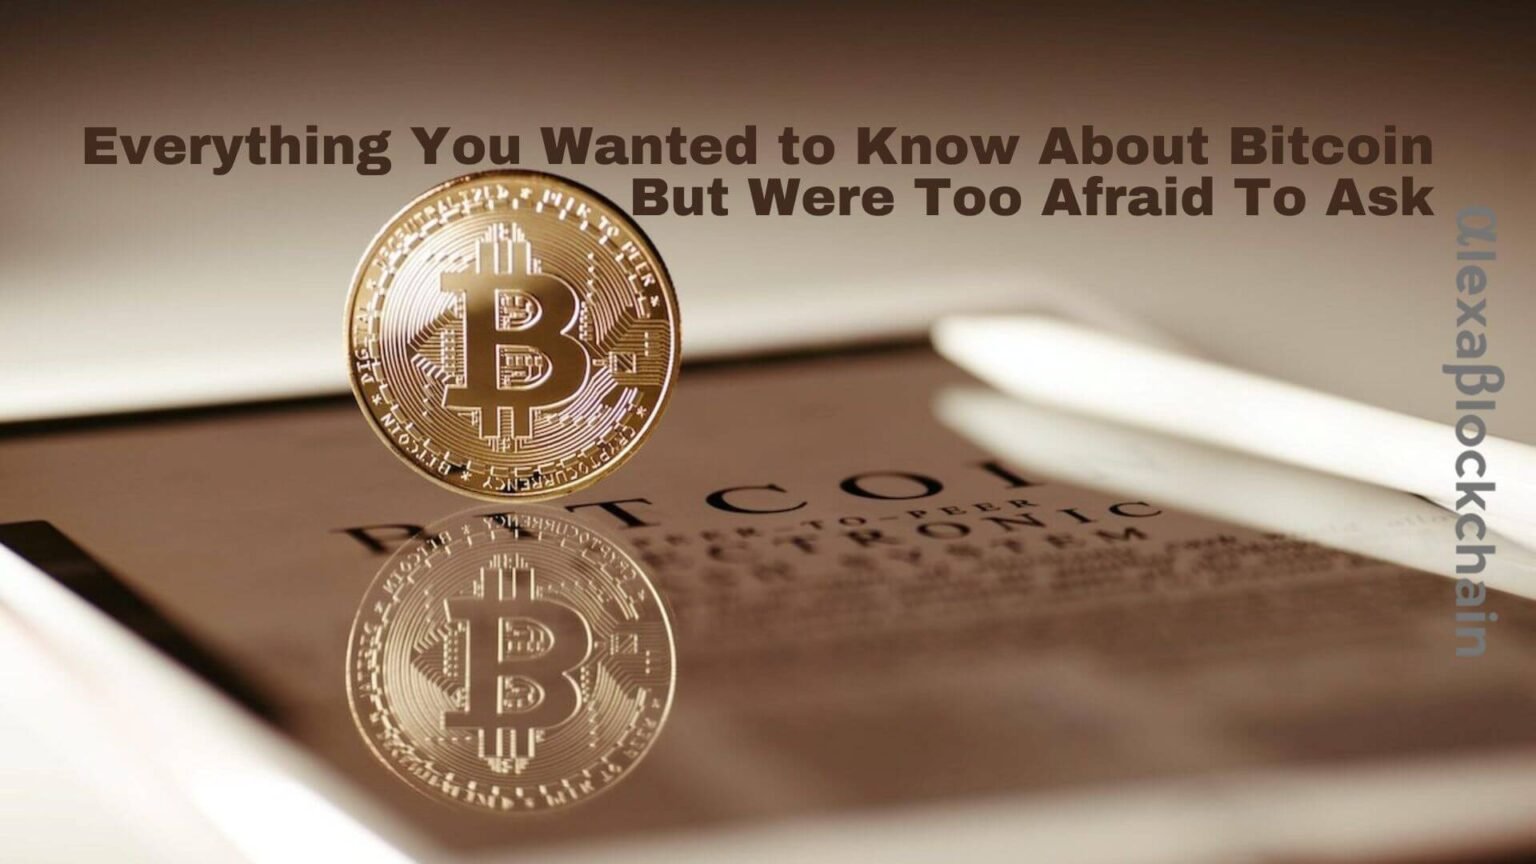 Everything You Wanted to Know About Bitcoin But Were Too Afraid To Ask